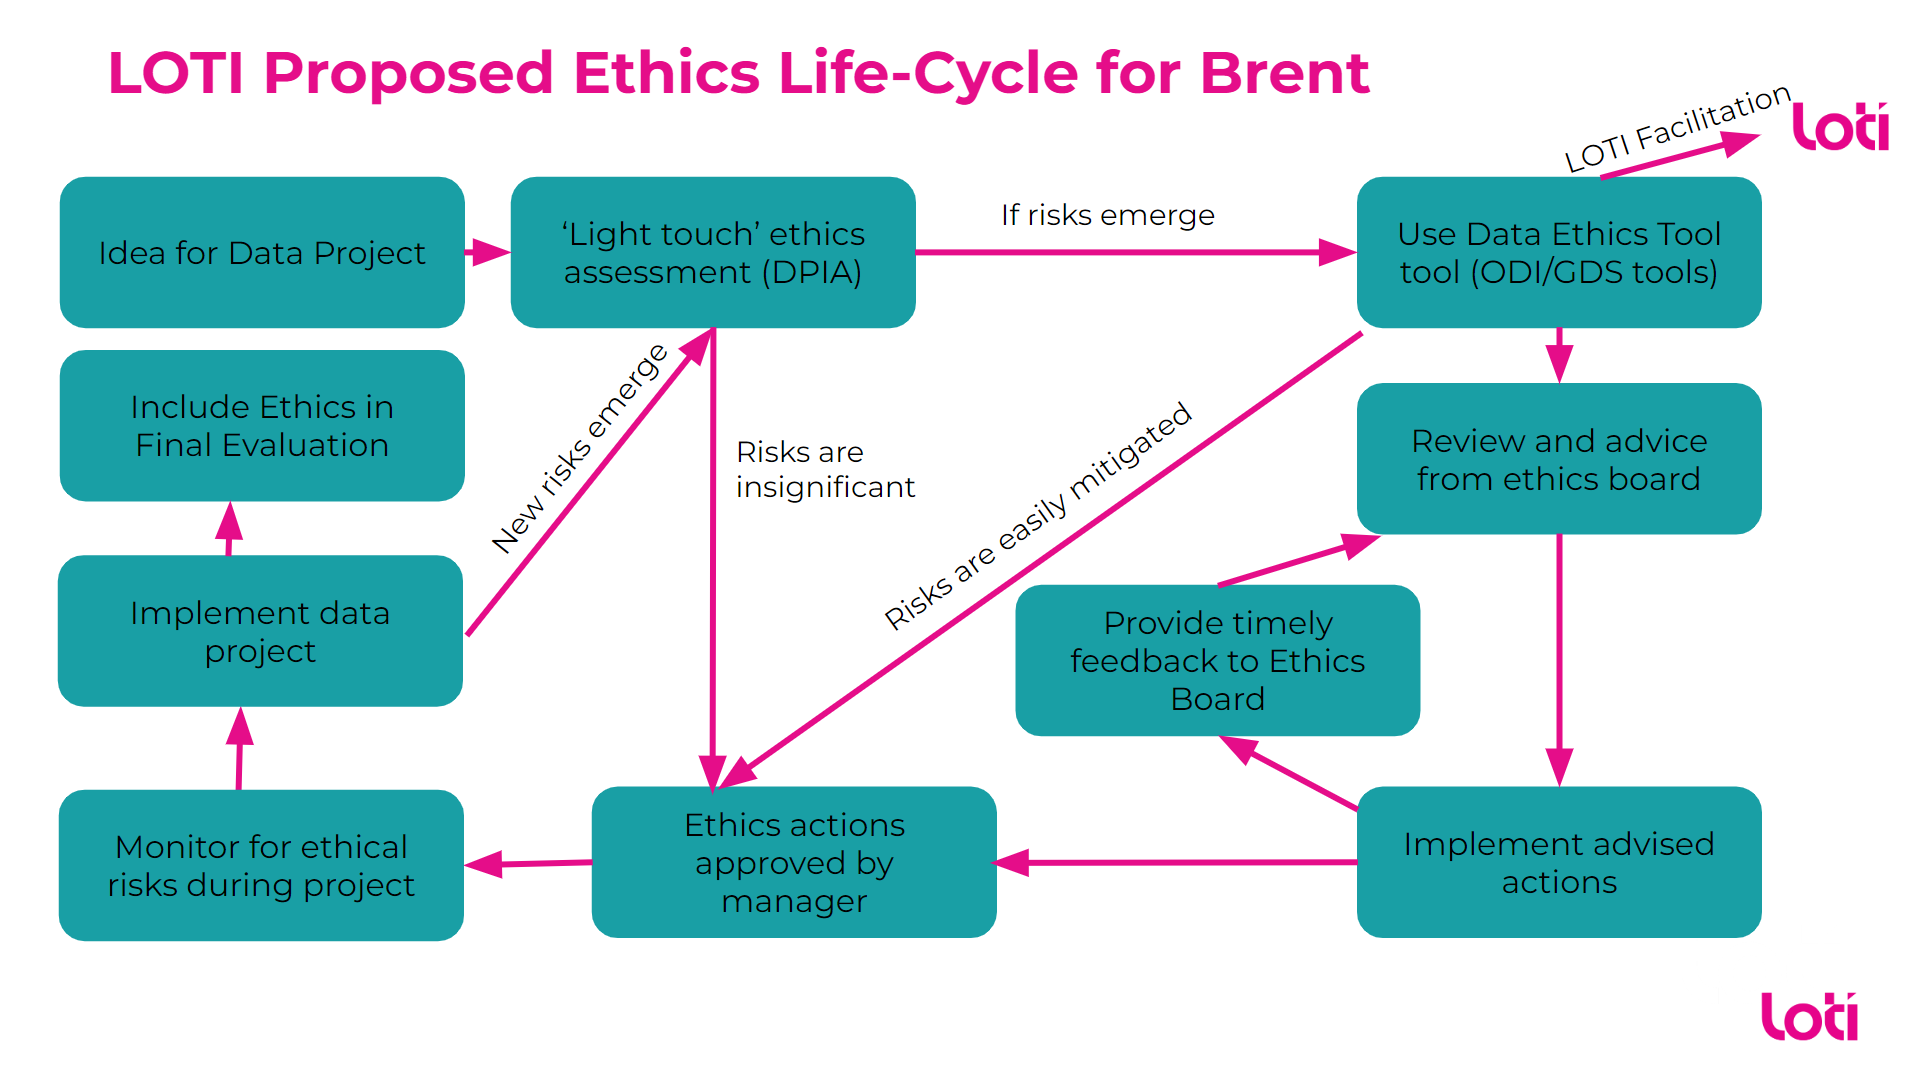 A lifecycle describing the different stages of a project when different types of ethics assessments might be required.